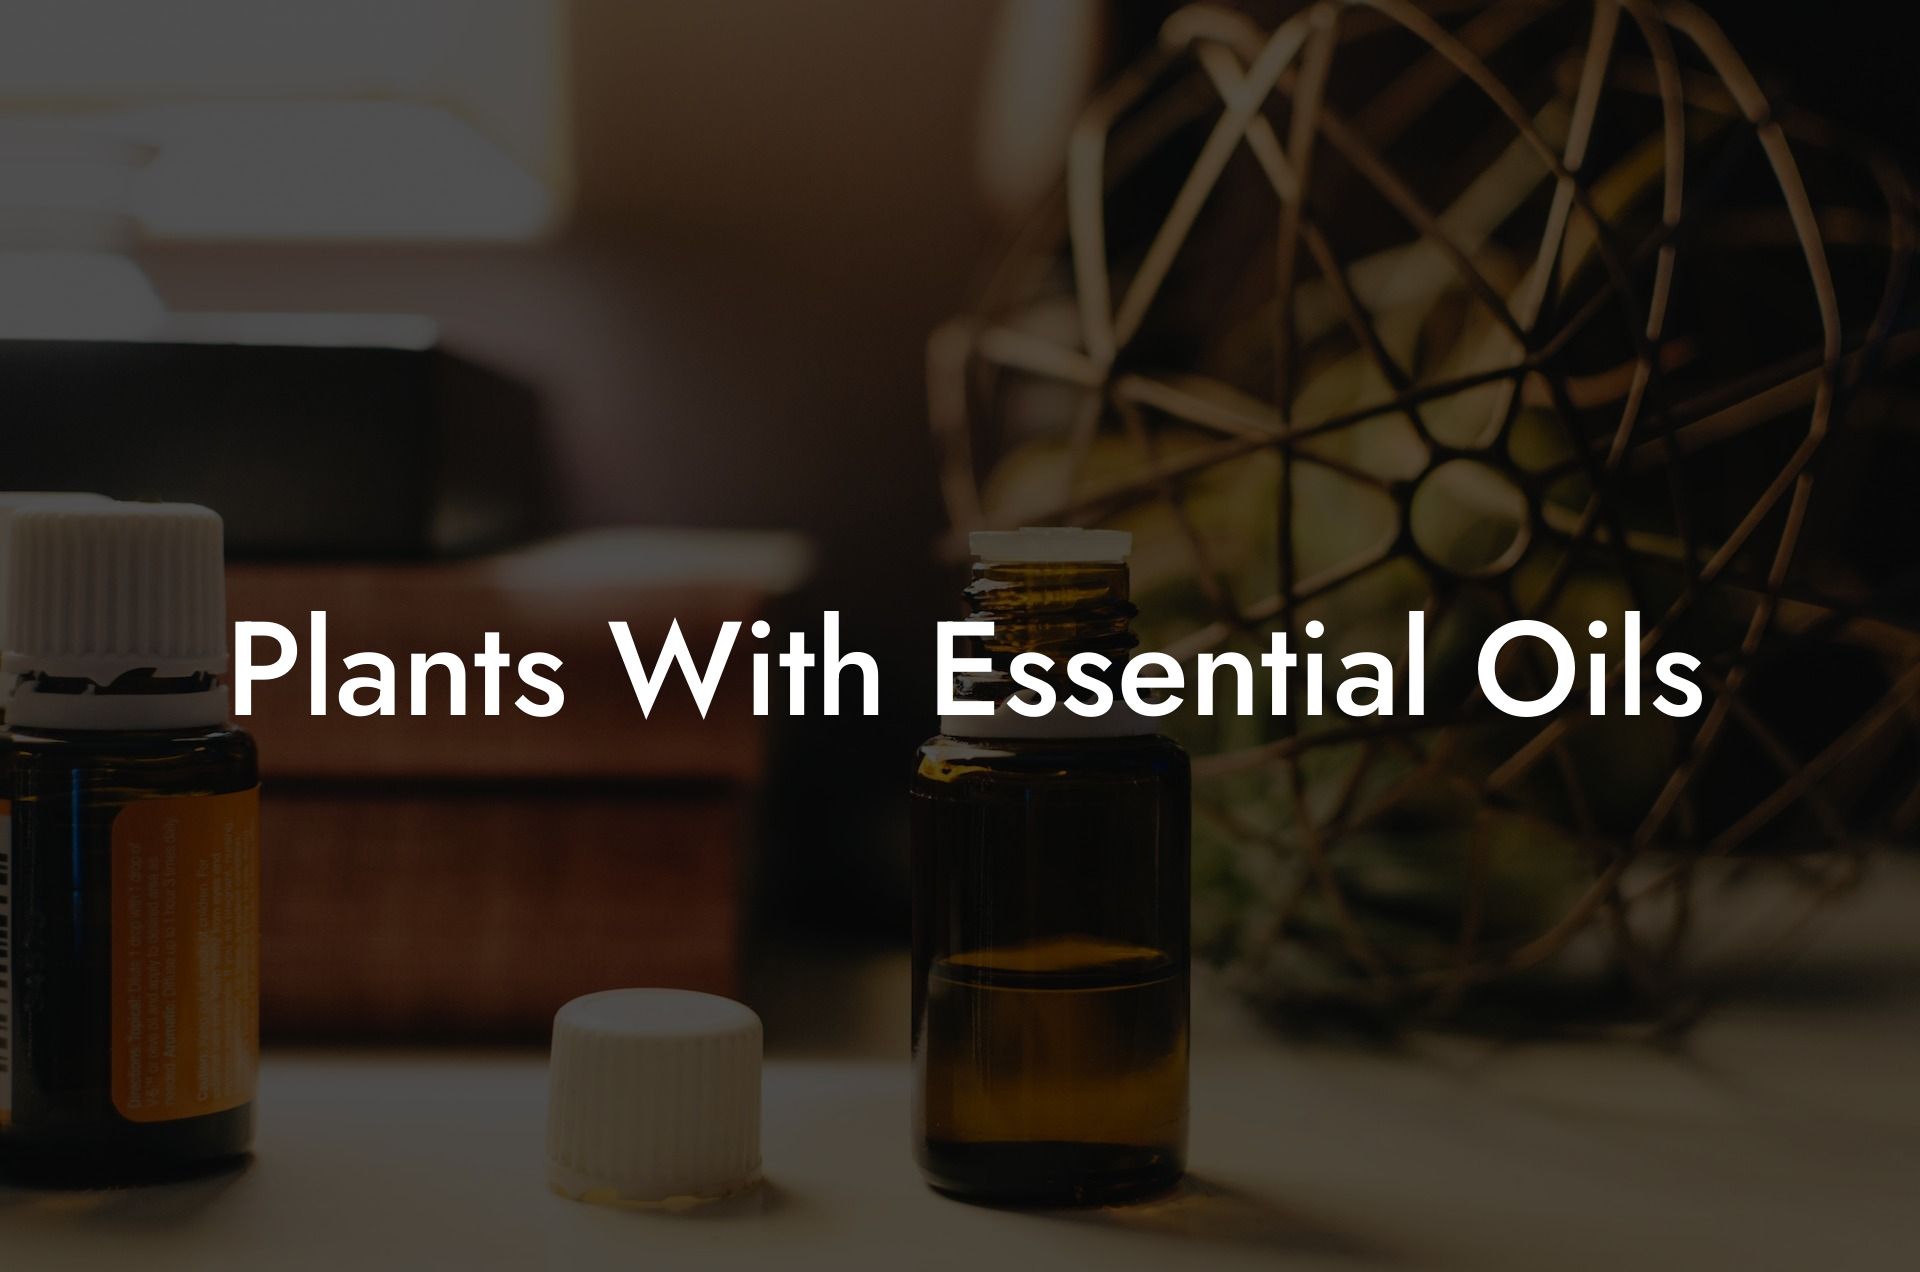 Plants With Essential Oils